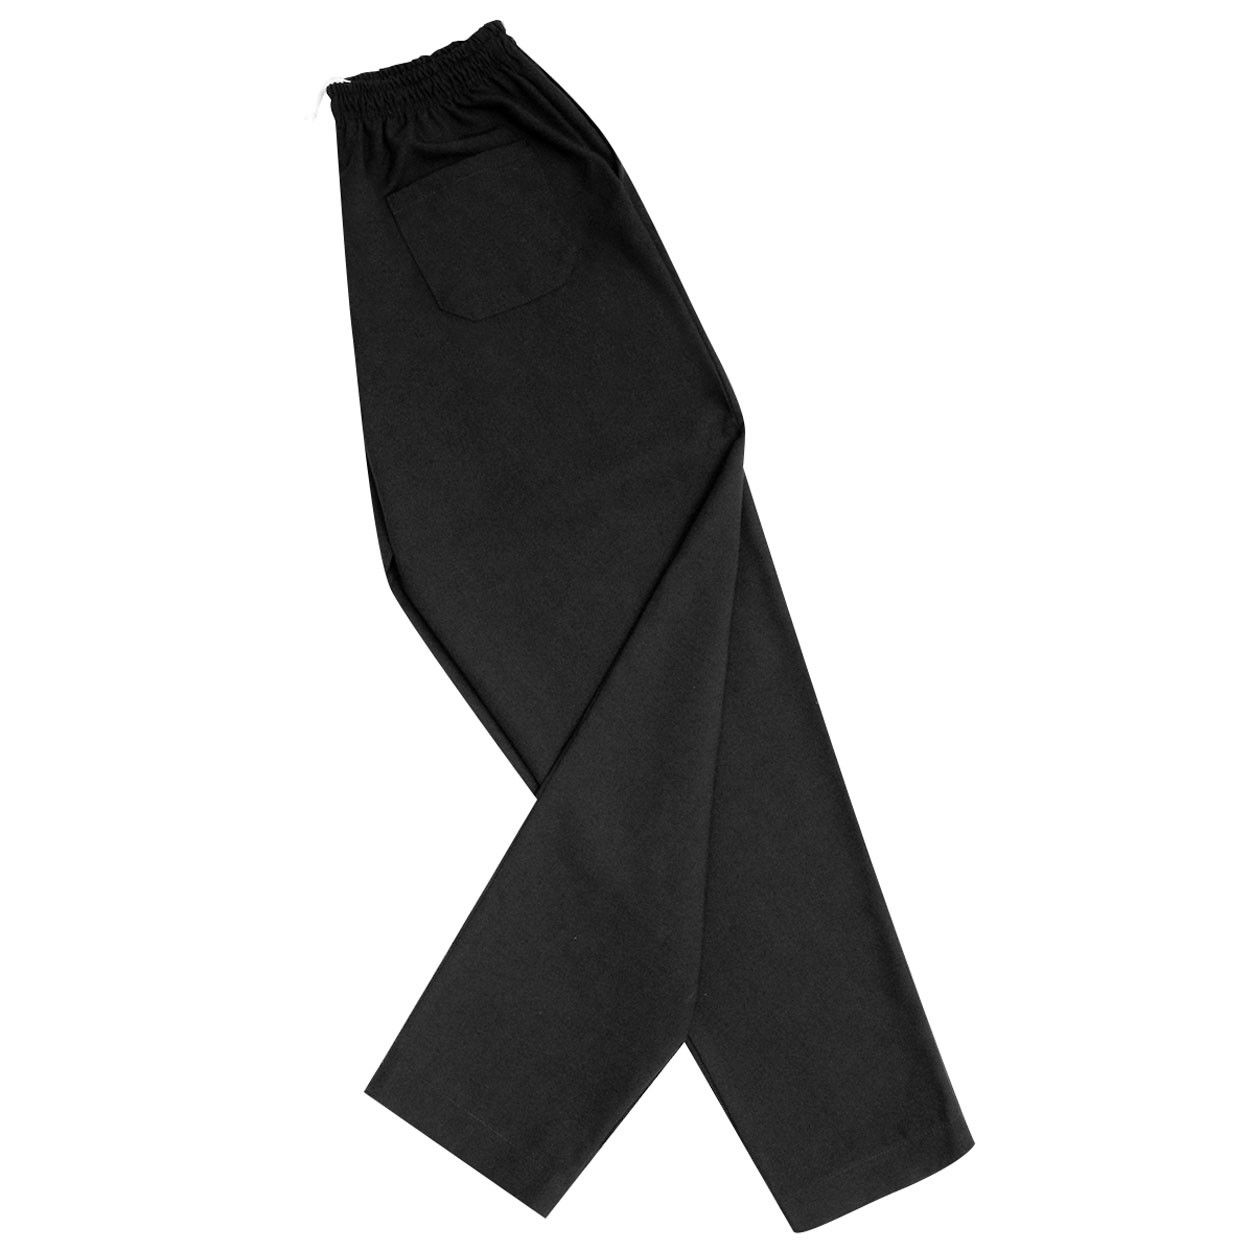 How heavy is the material of these black chef pants?